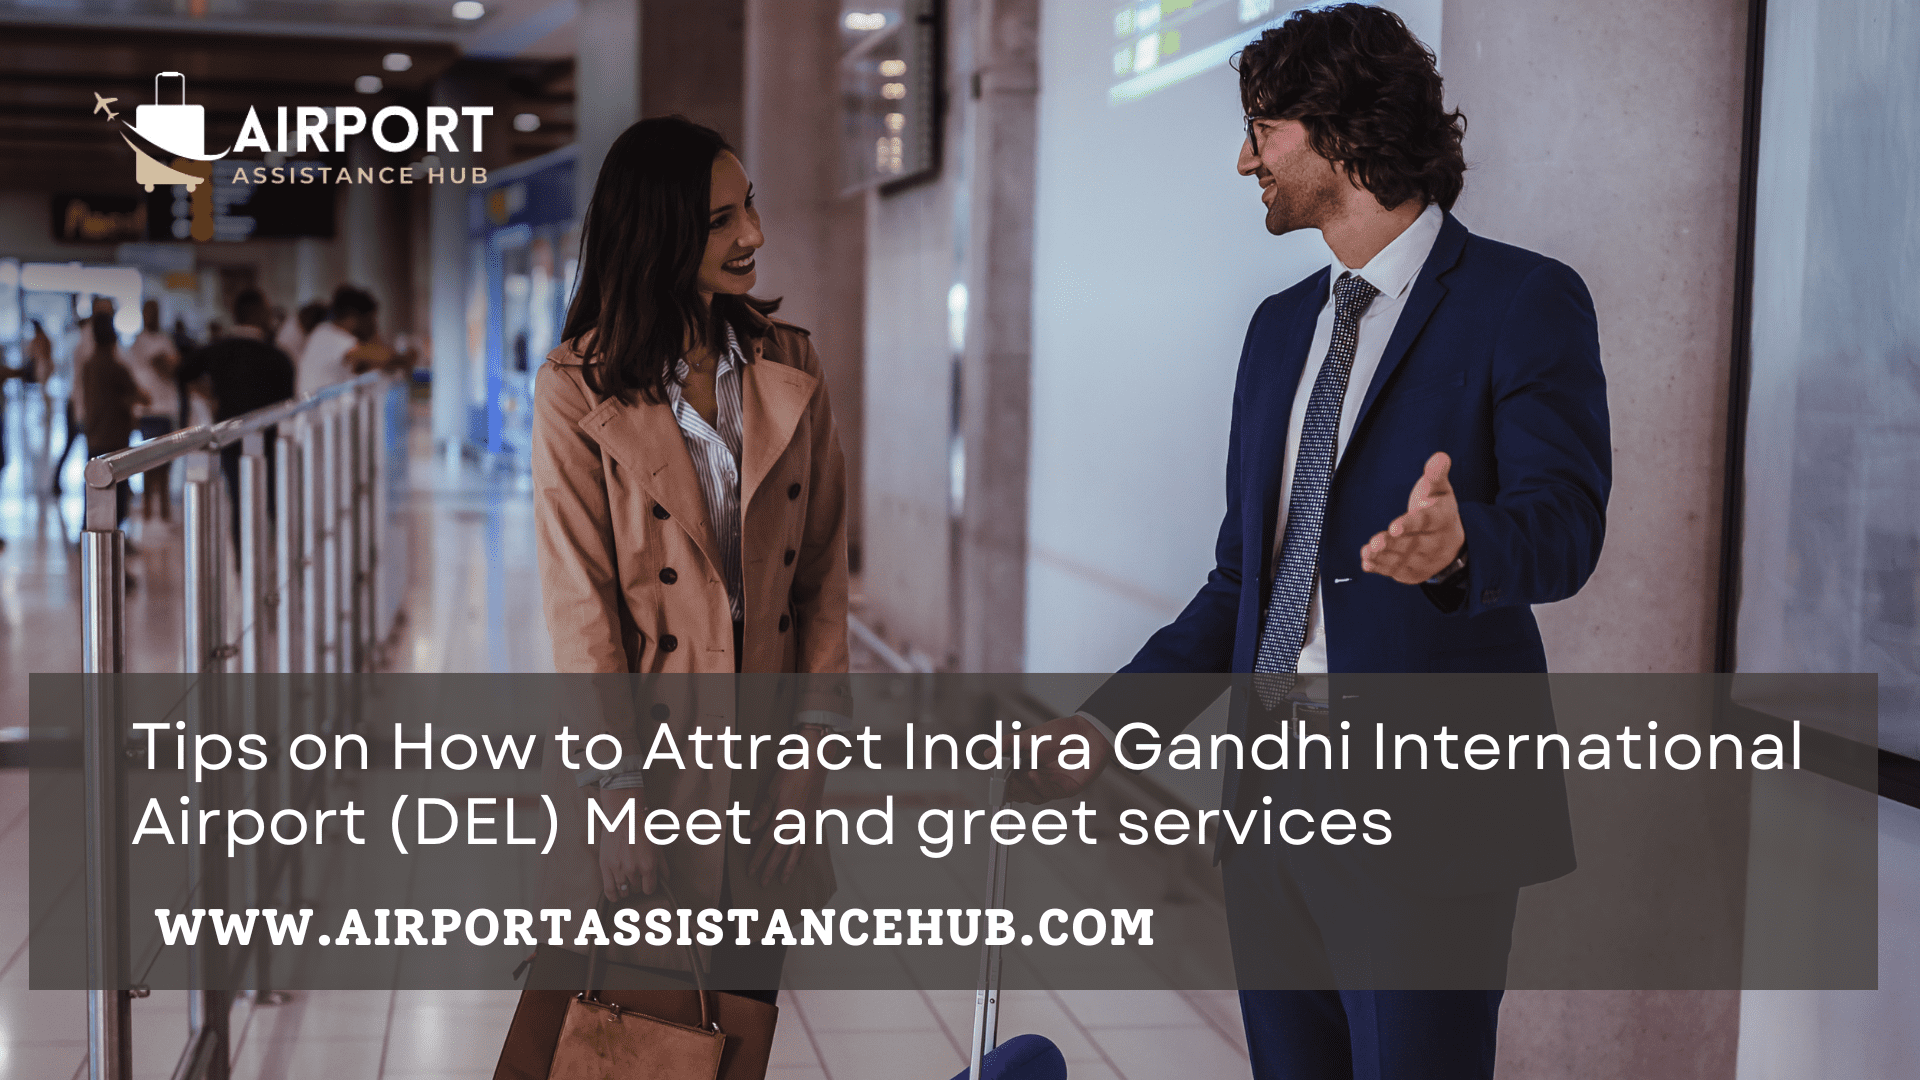 Tips on How to Attract Indira Gandhi International Airport (DEL) Meet and greet services